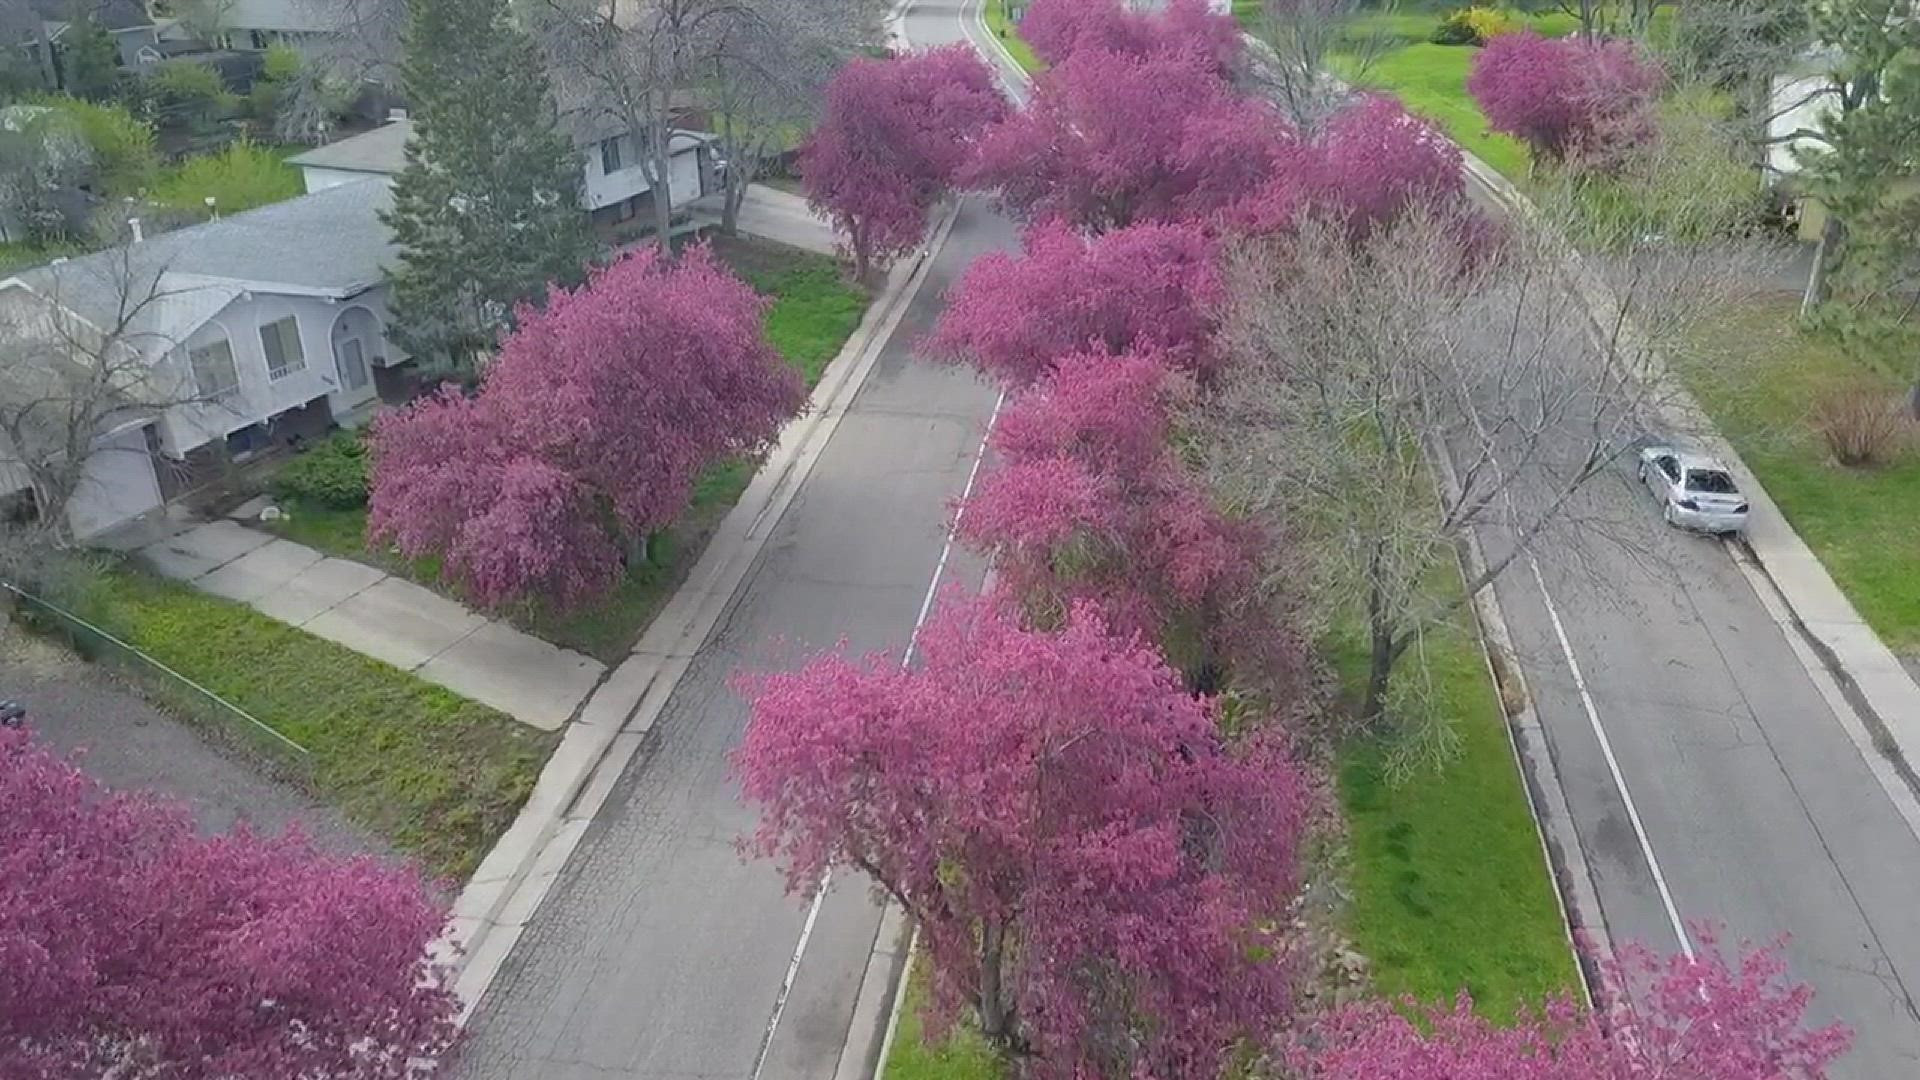 The crabapple route in Littleton is absolutely stunning during this time of year.